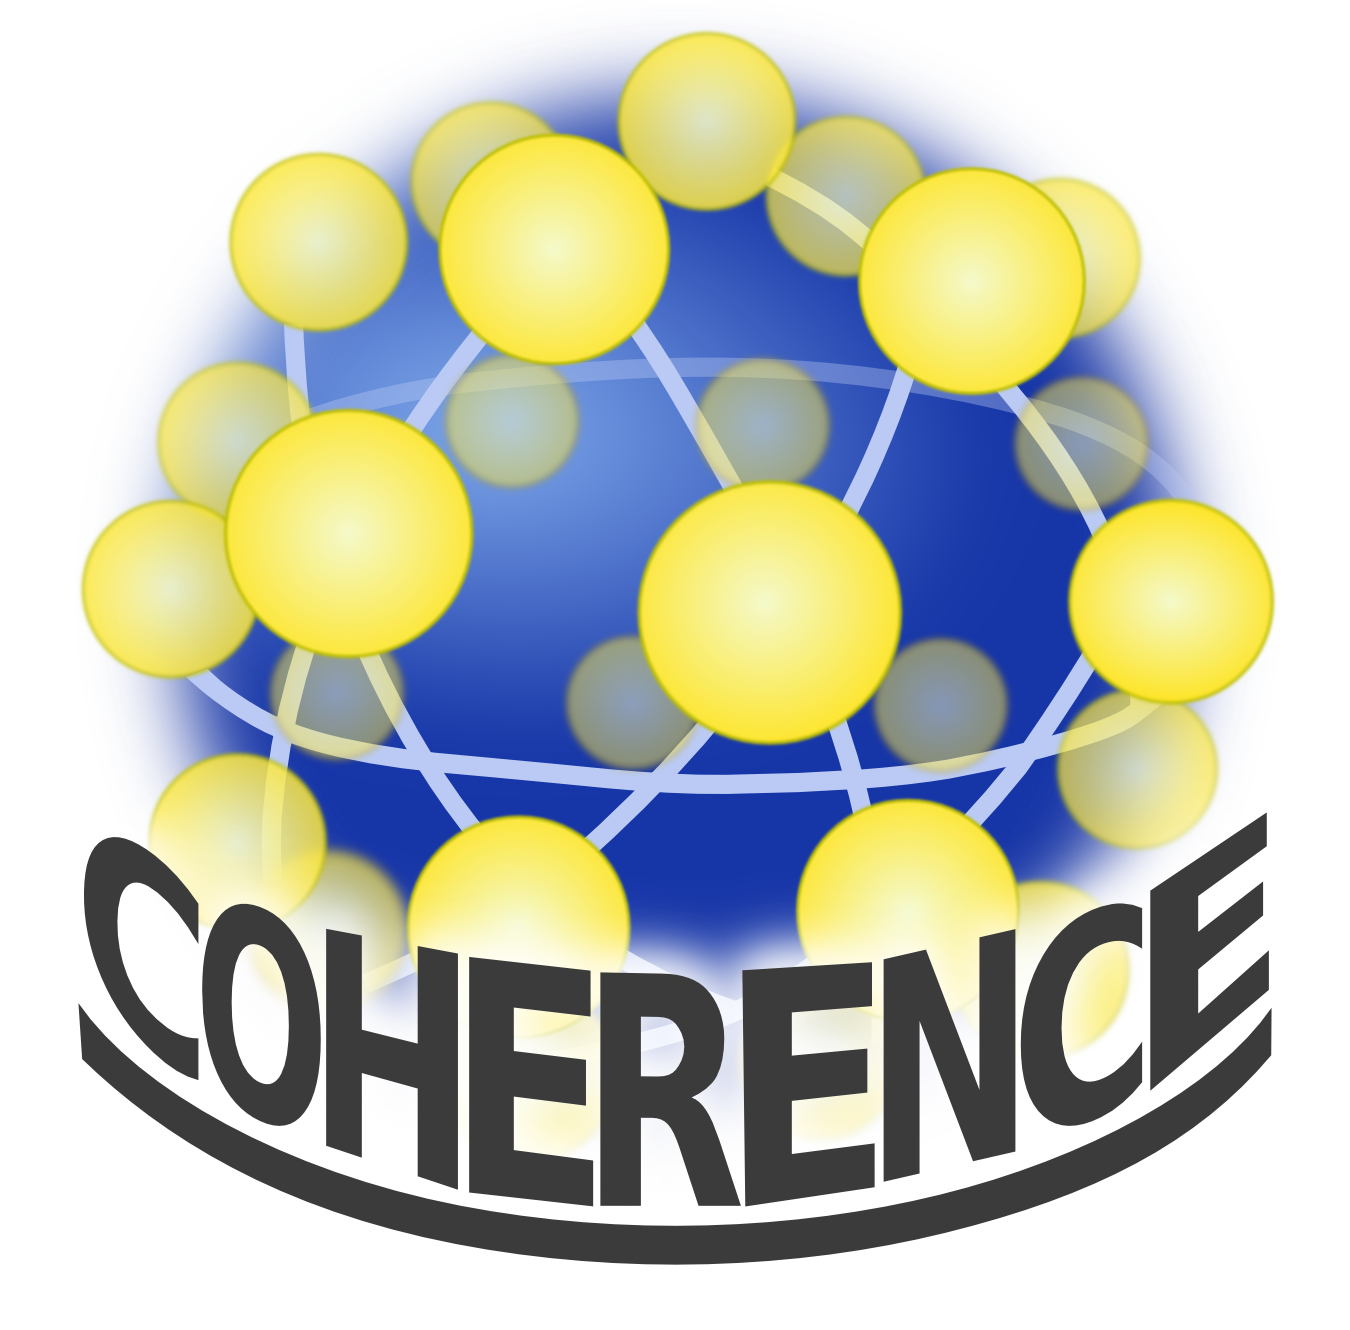 Coherence X download the new for windows